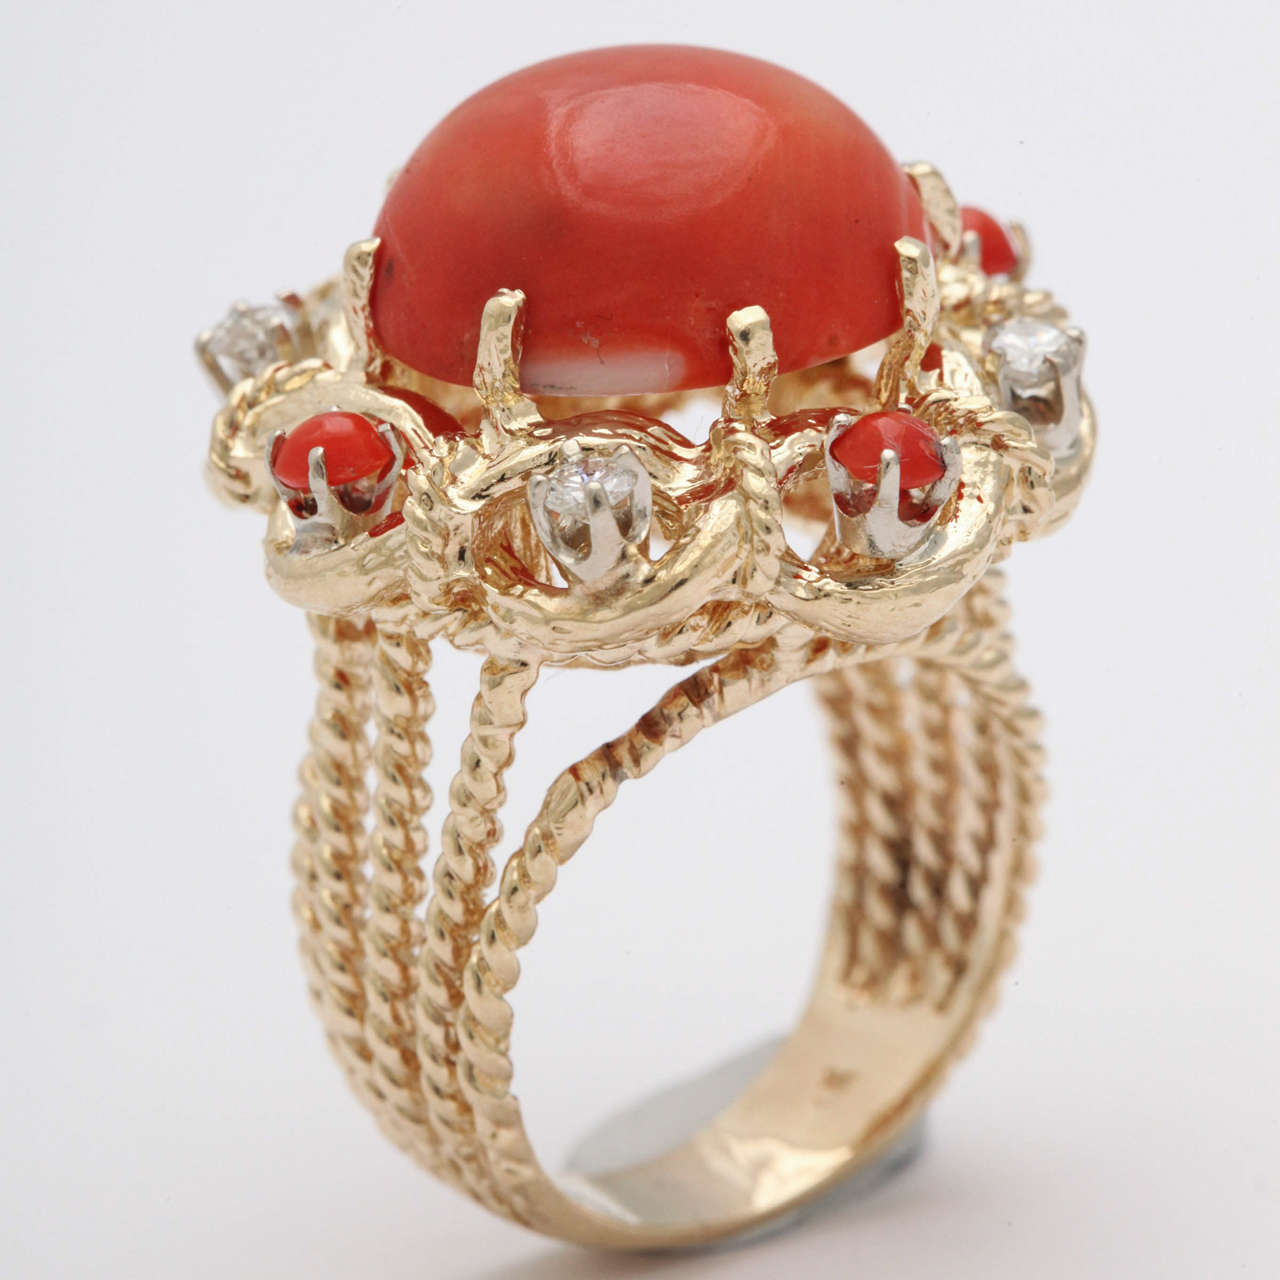 La Dolce Vita - Large Italian Bauble - 2 tone polished Coral with full cut tiny Diamond Accents.  Hand made rope twist & monting.